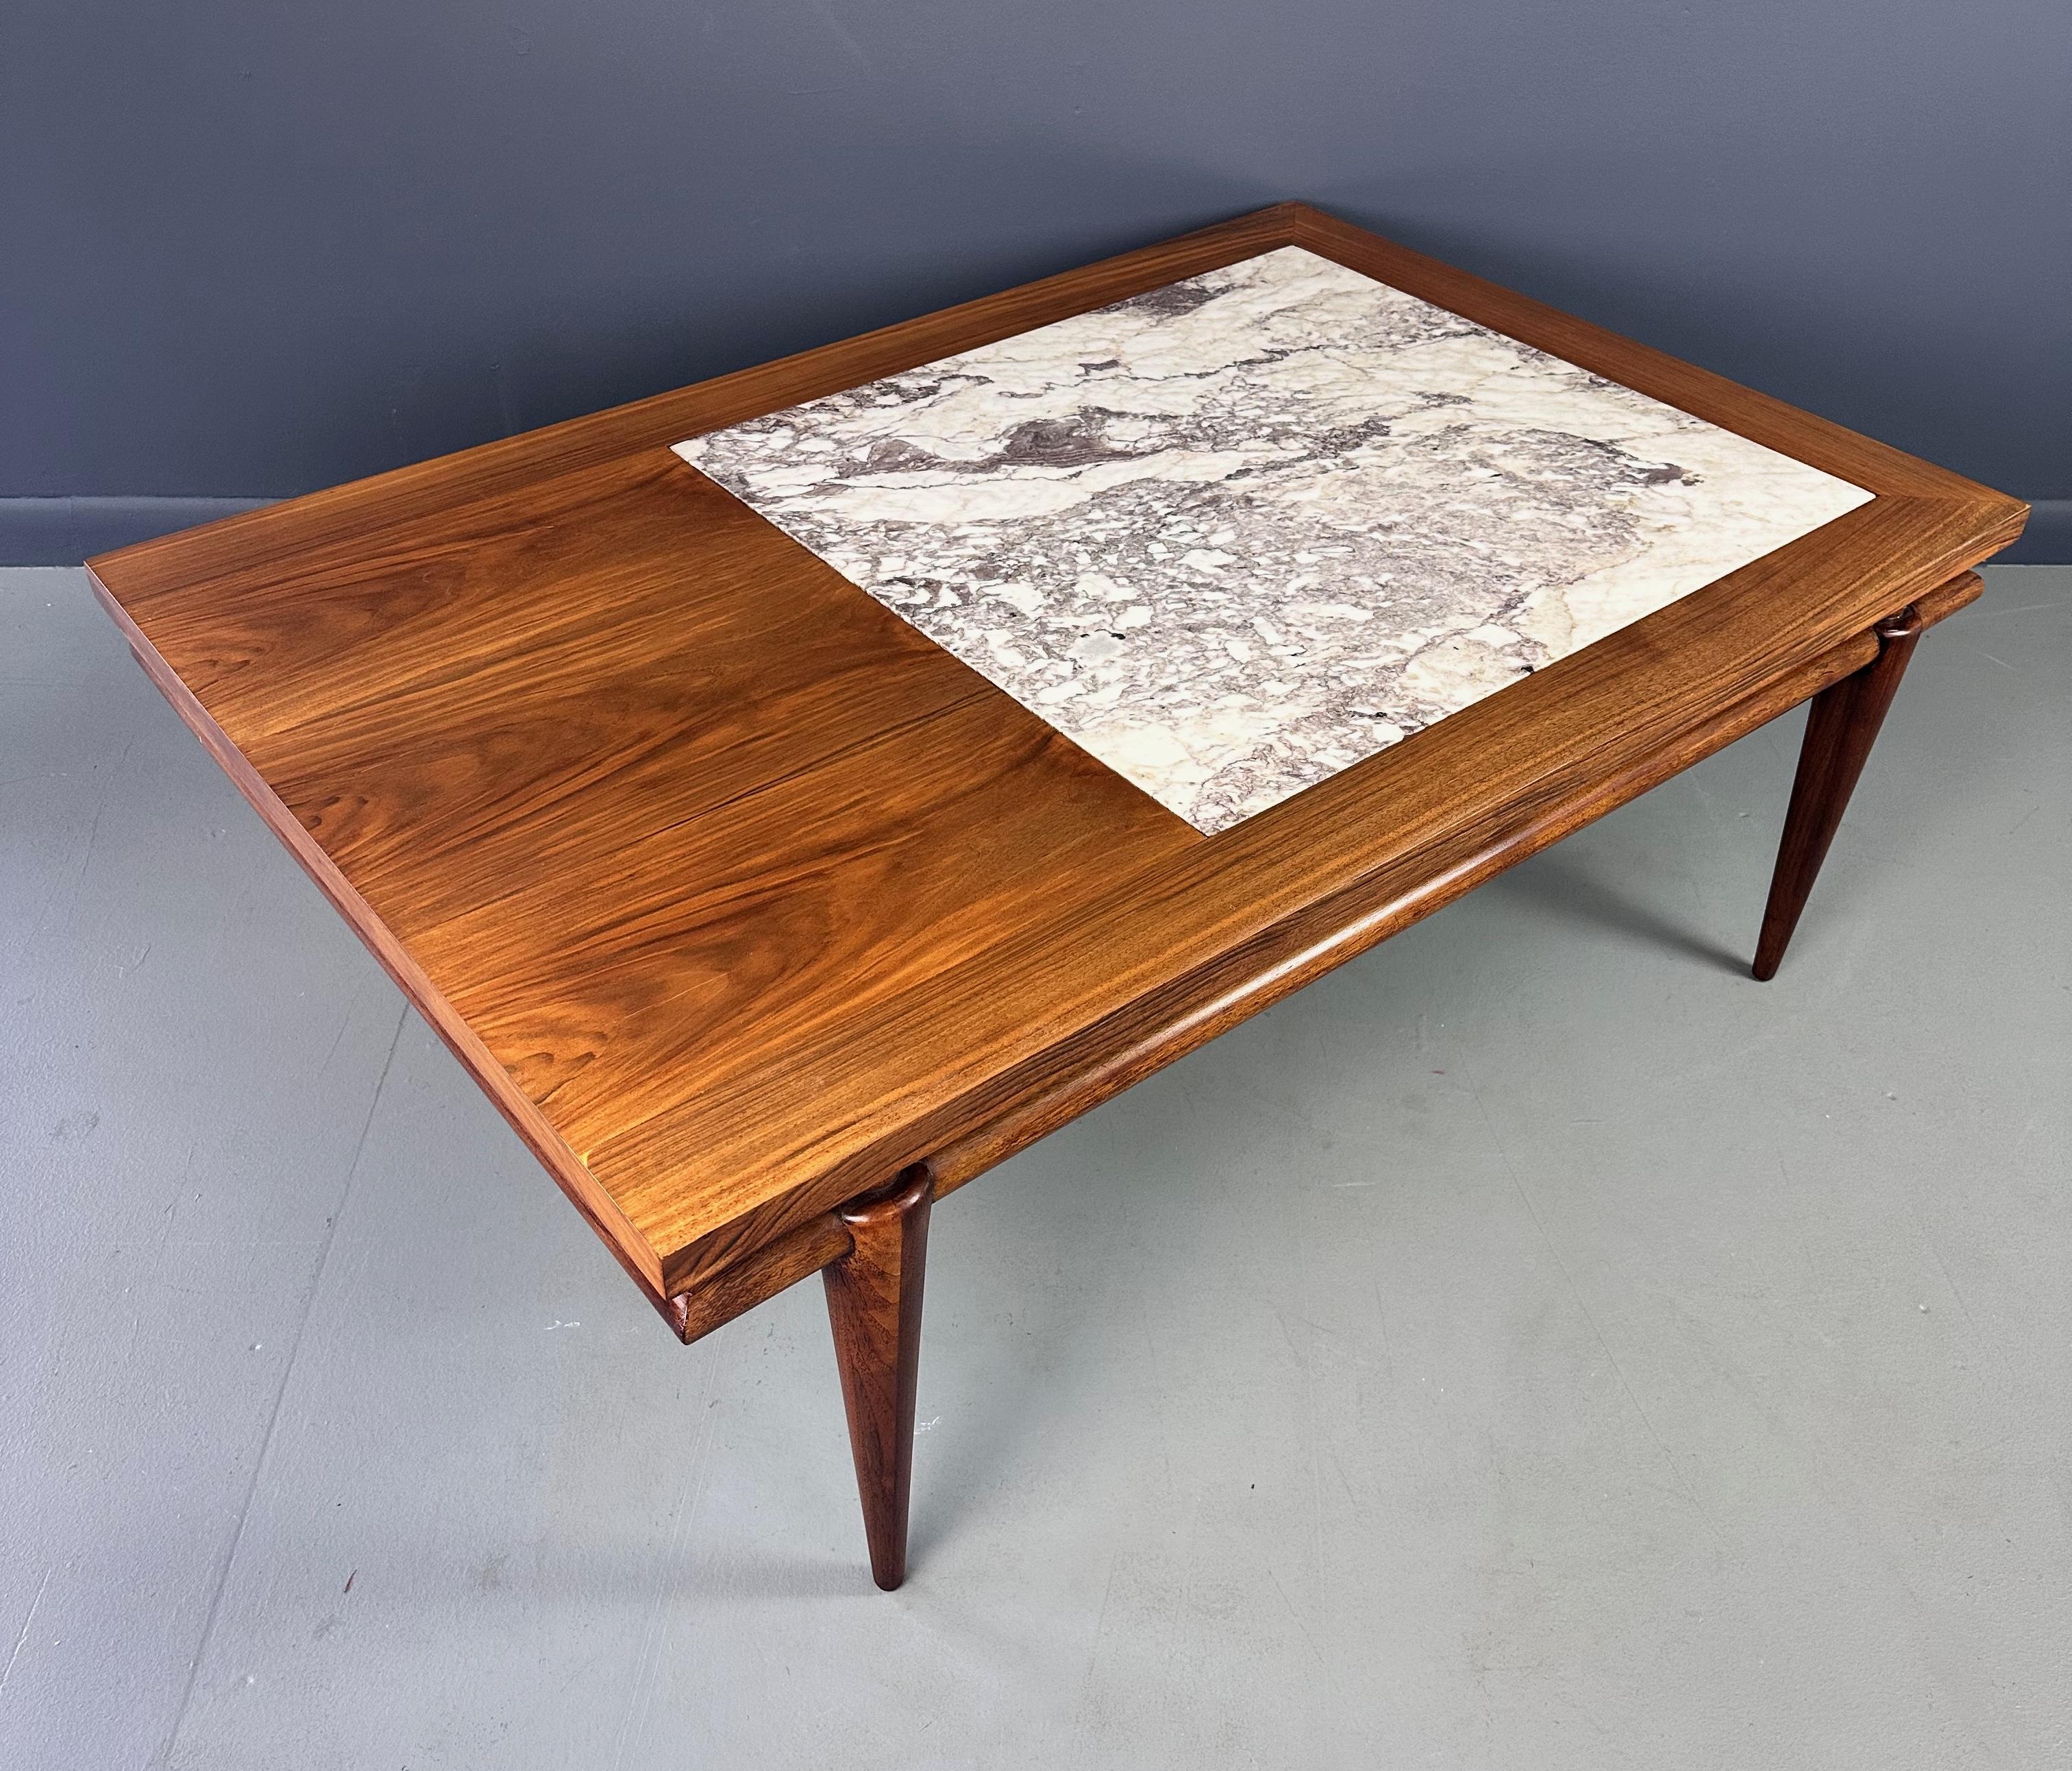 Crafted with elegant marble and rich walnut, the John Widdicomb Coffee Table brings sophisticated style to any living space. Inspired by the iconic designs of Robsjohn Gibbings, this piece oozes class and luxury. Elevate your home decor with this